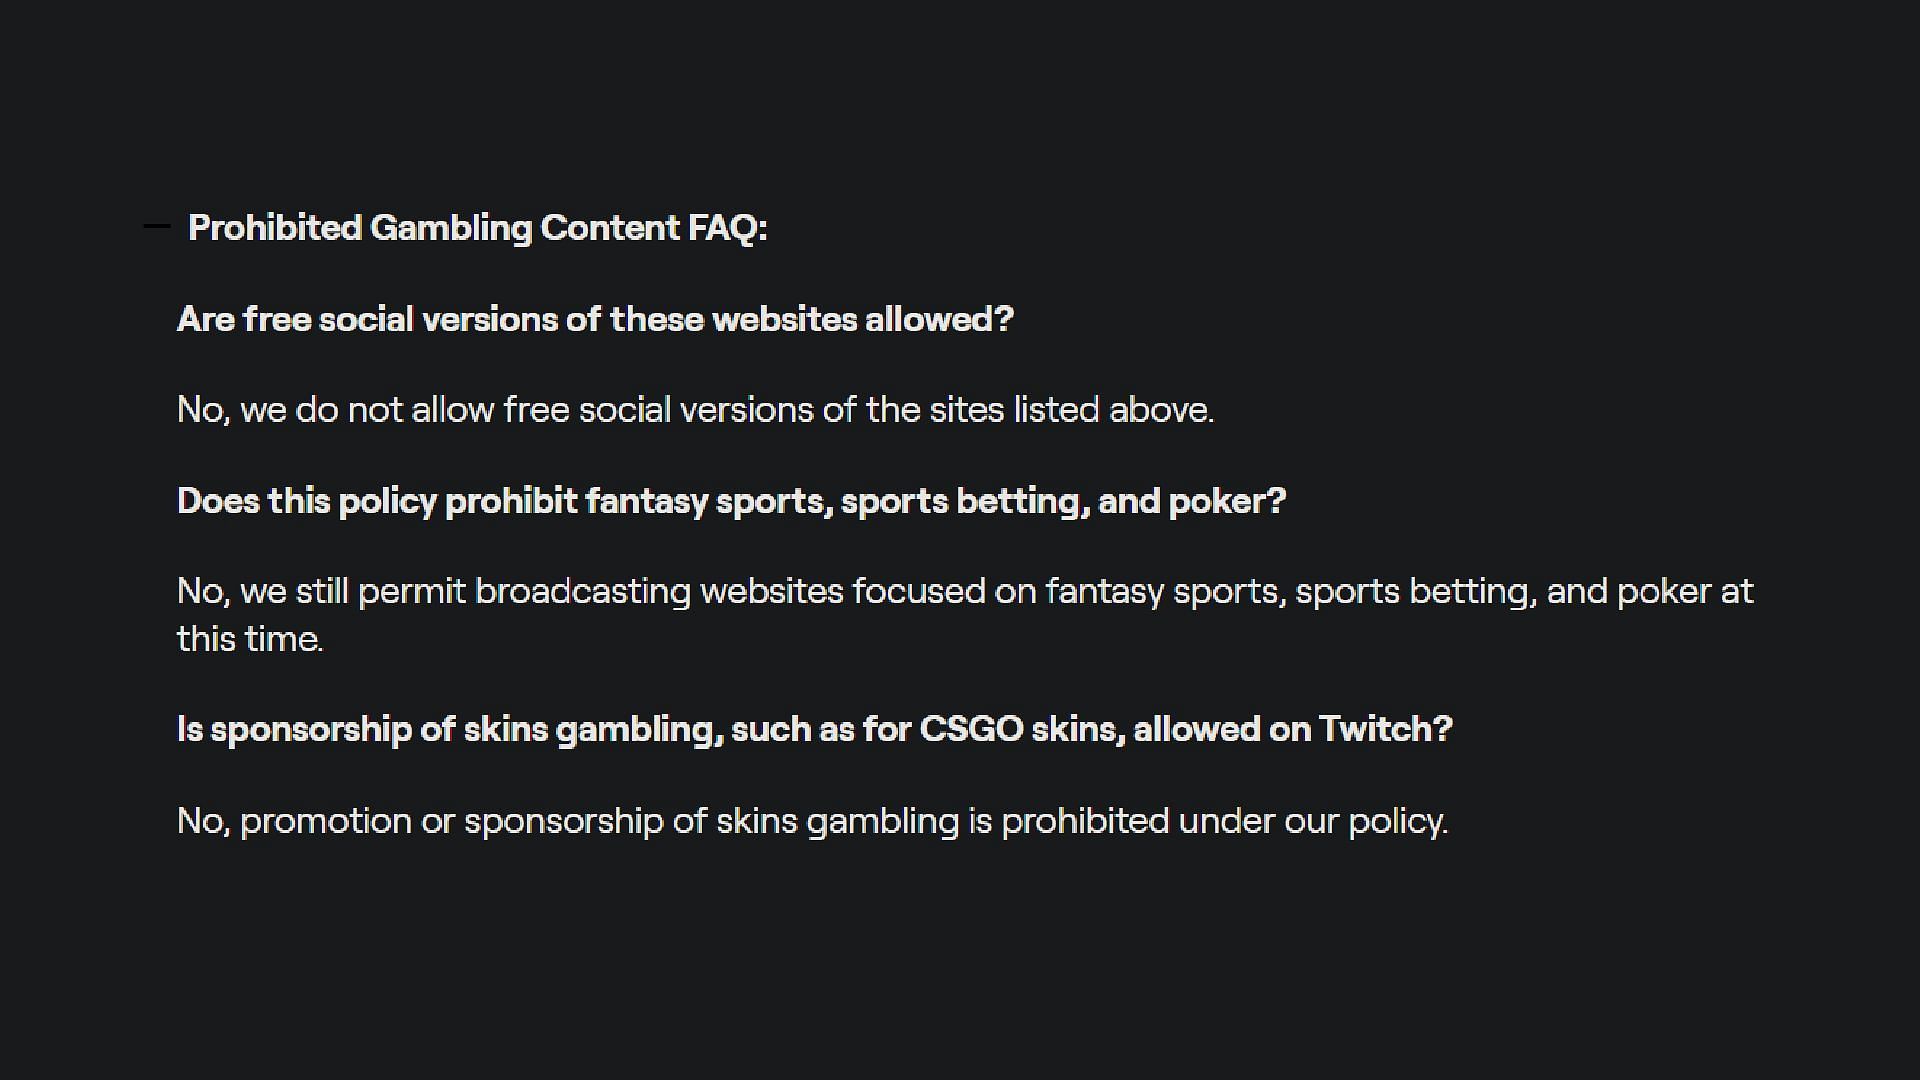 CS:GO skin gambling promotion and sponsorships have been banned. Image via safety.twitch.tv)